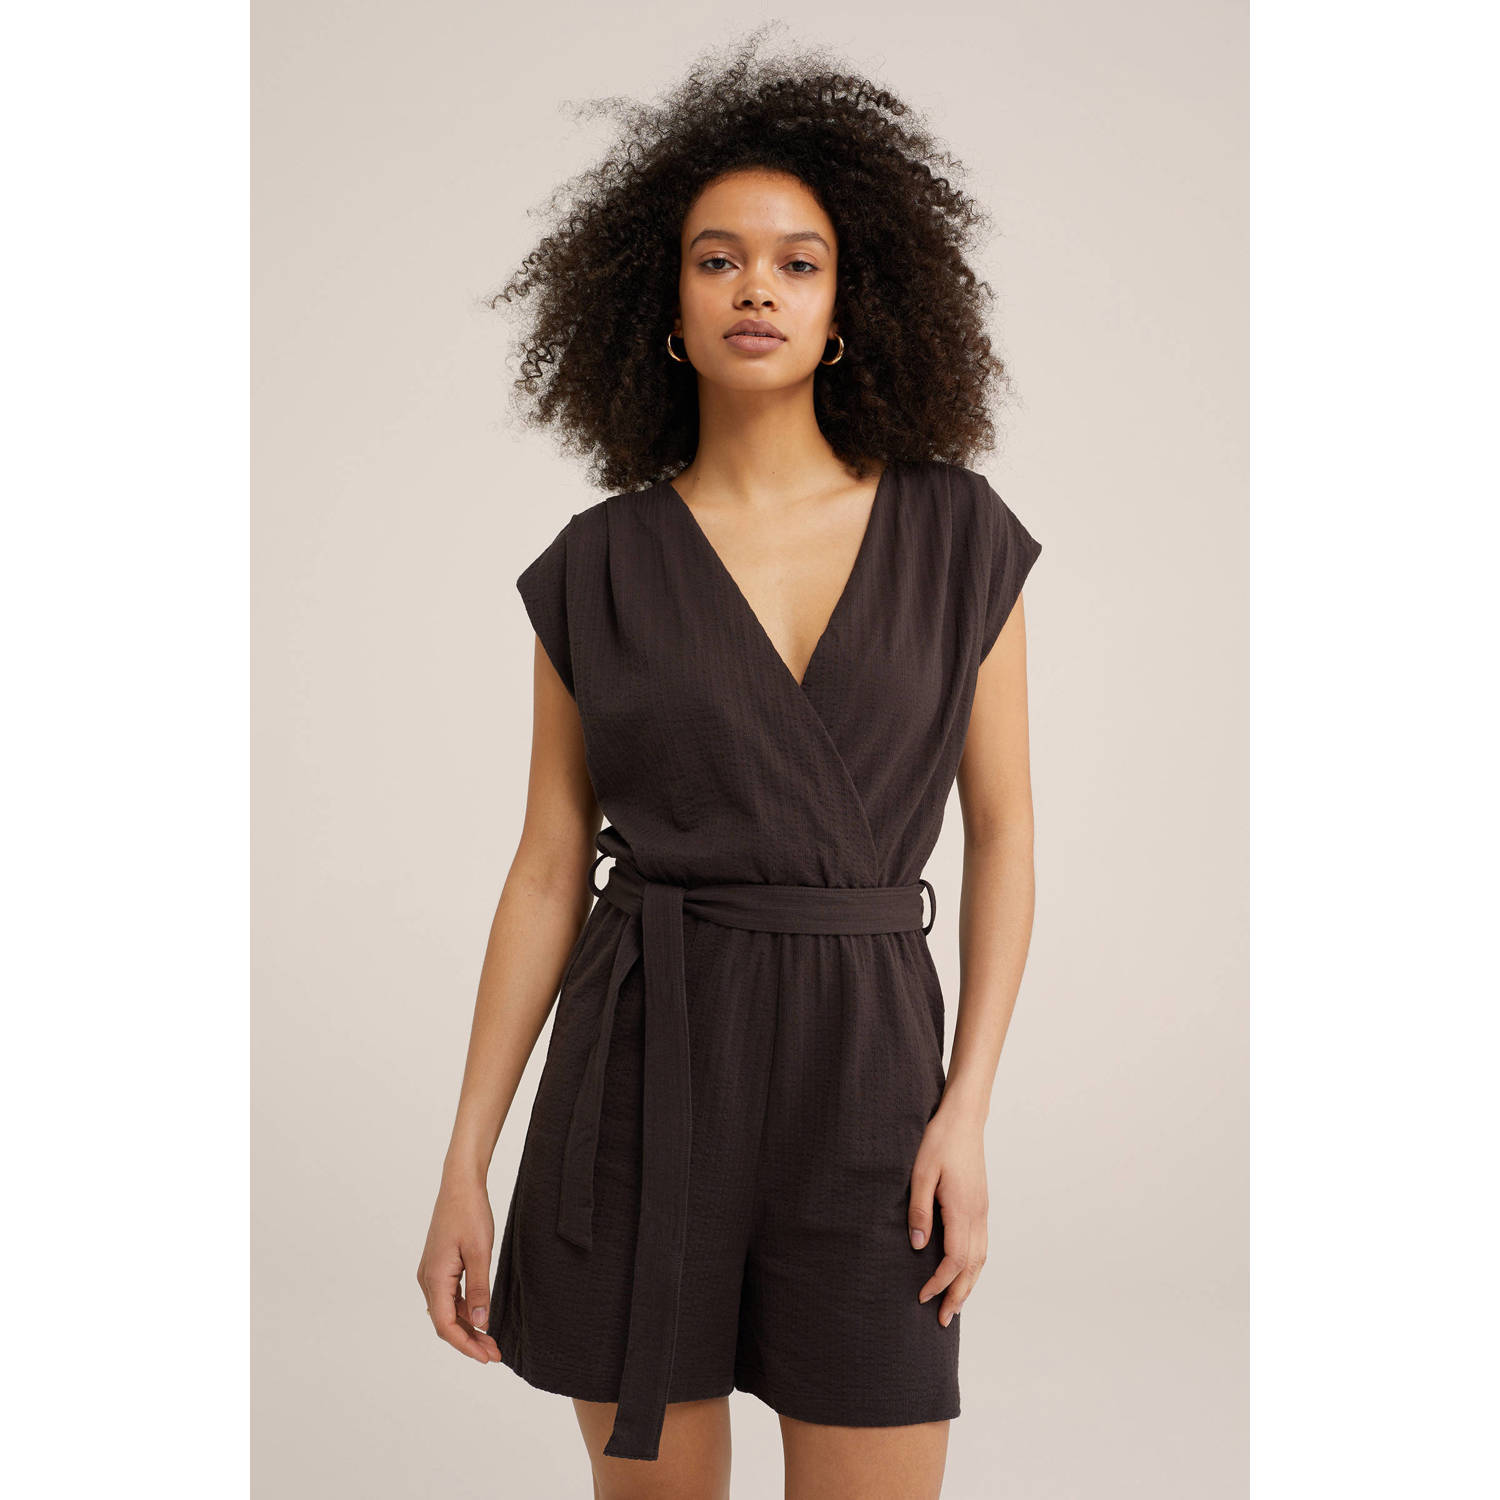 WE Fashion playsuit donkerbruin